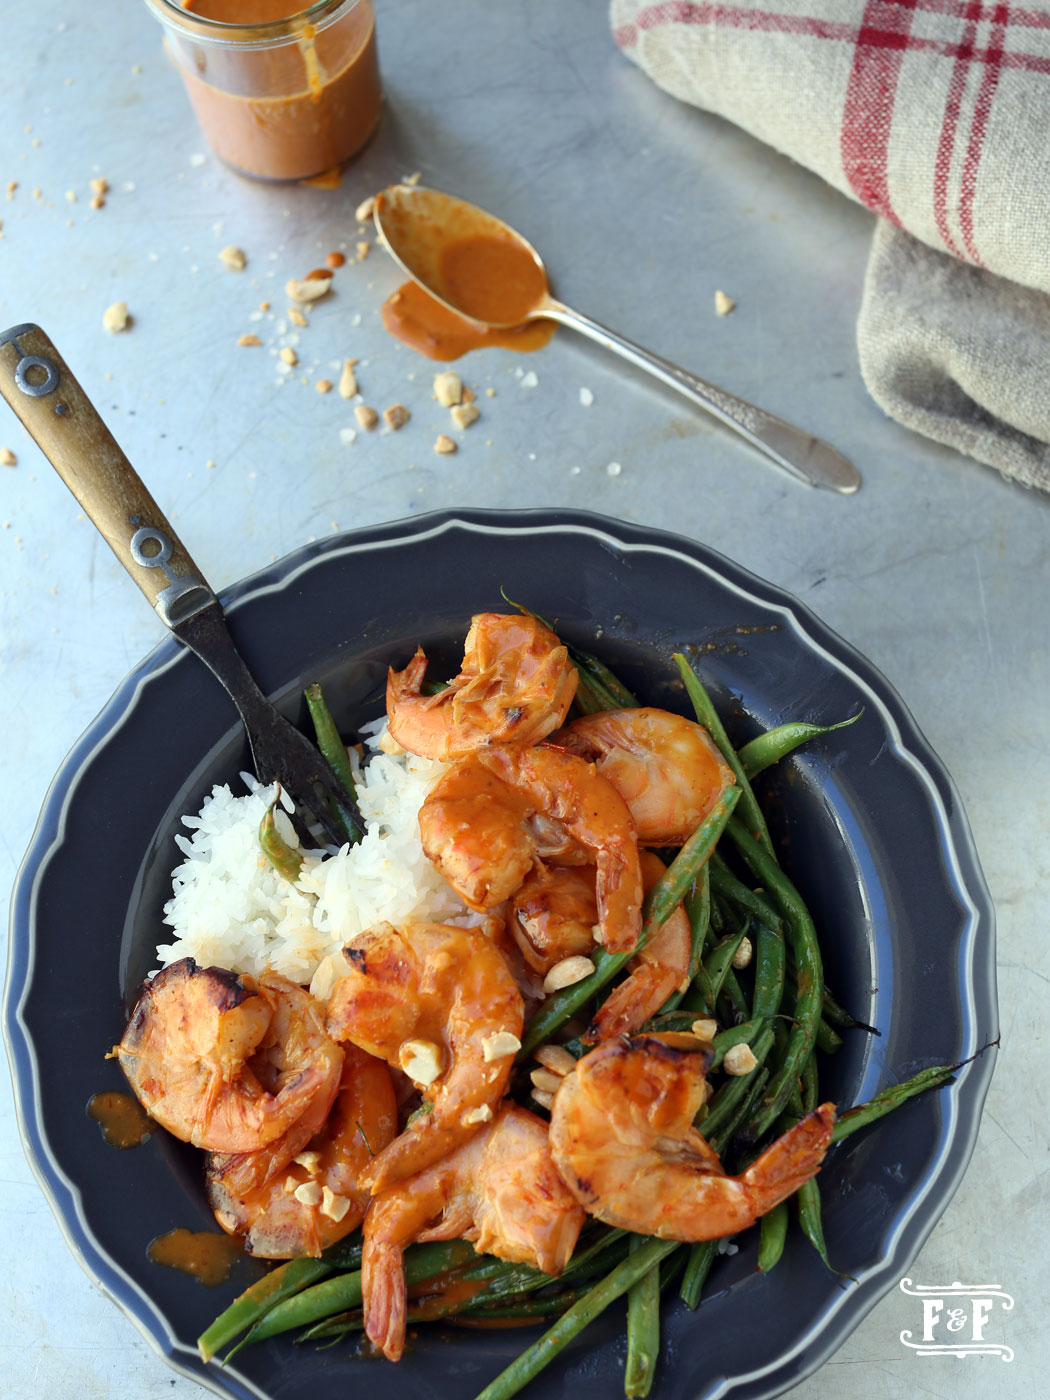  Roasted Shrimp & Green Beans With PB Sauce